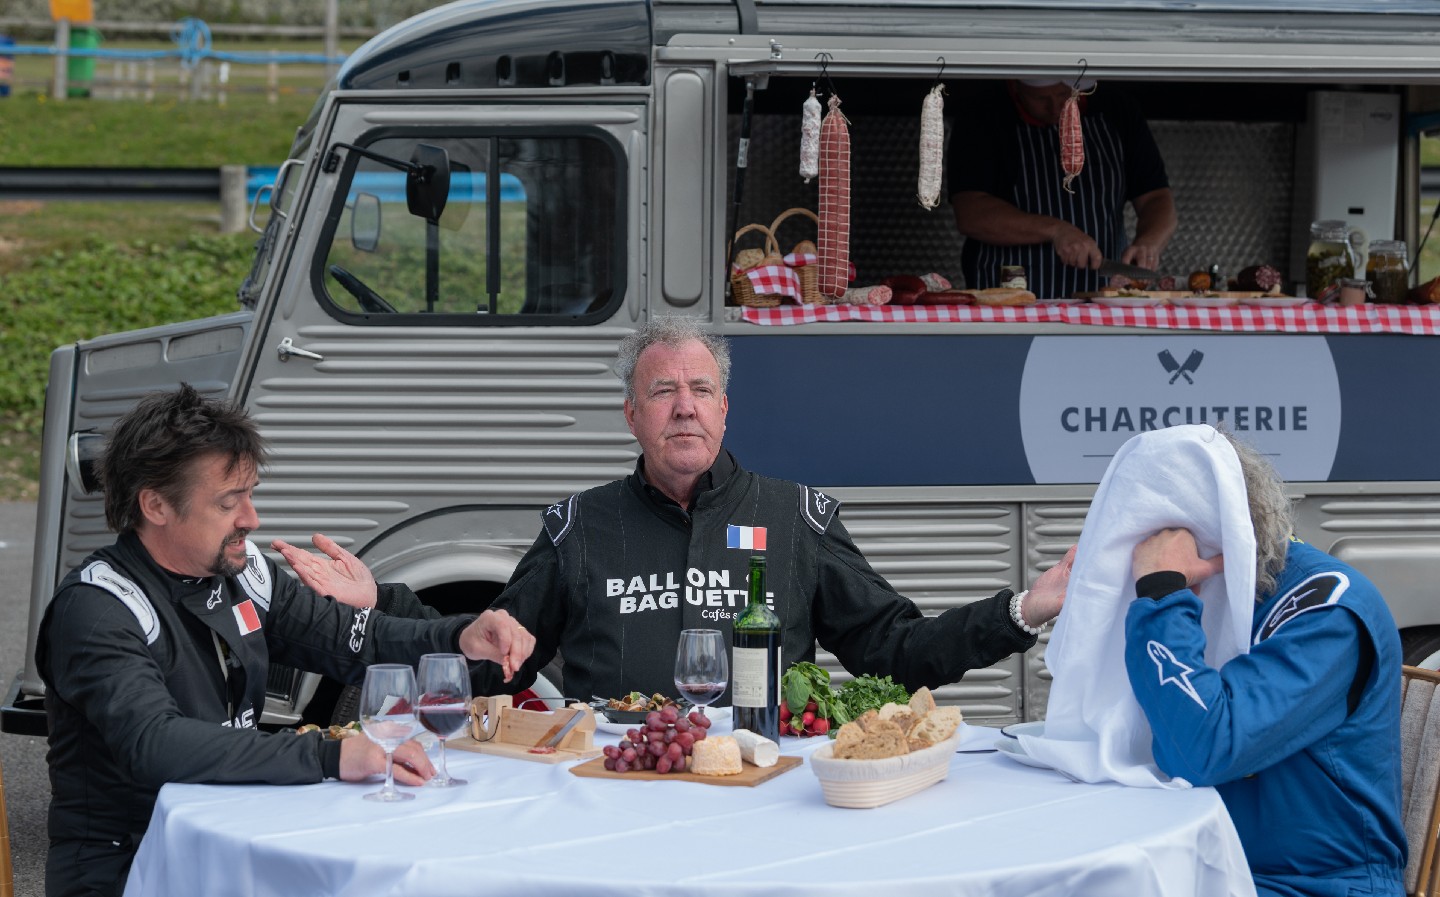 Jeremy Clarkson, Richard Hammond and James May in The Grand Tour French car special "